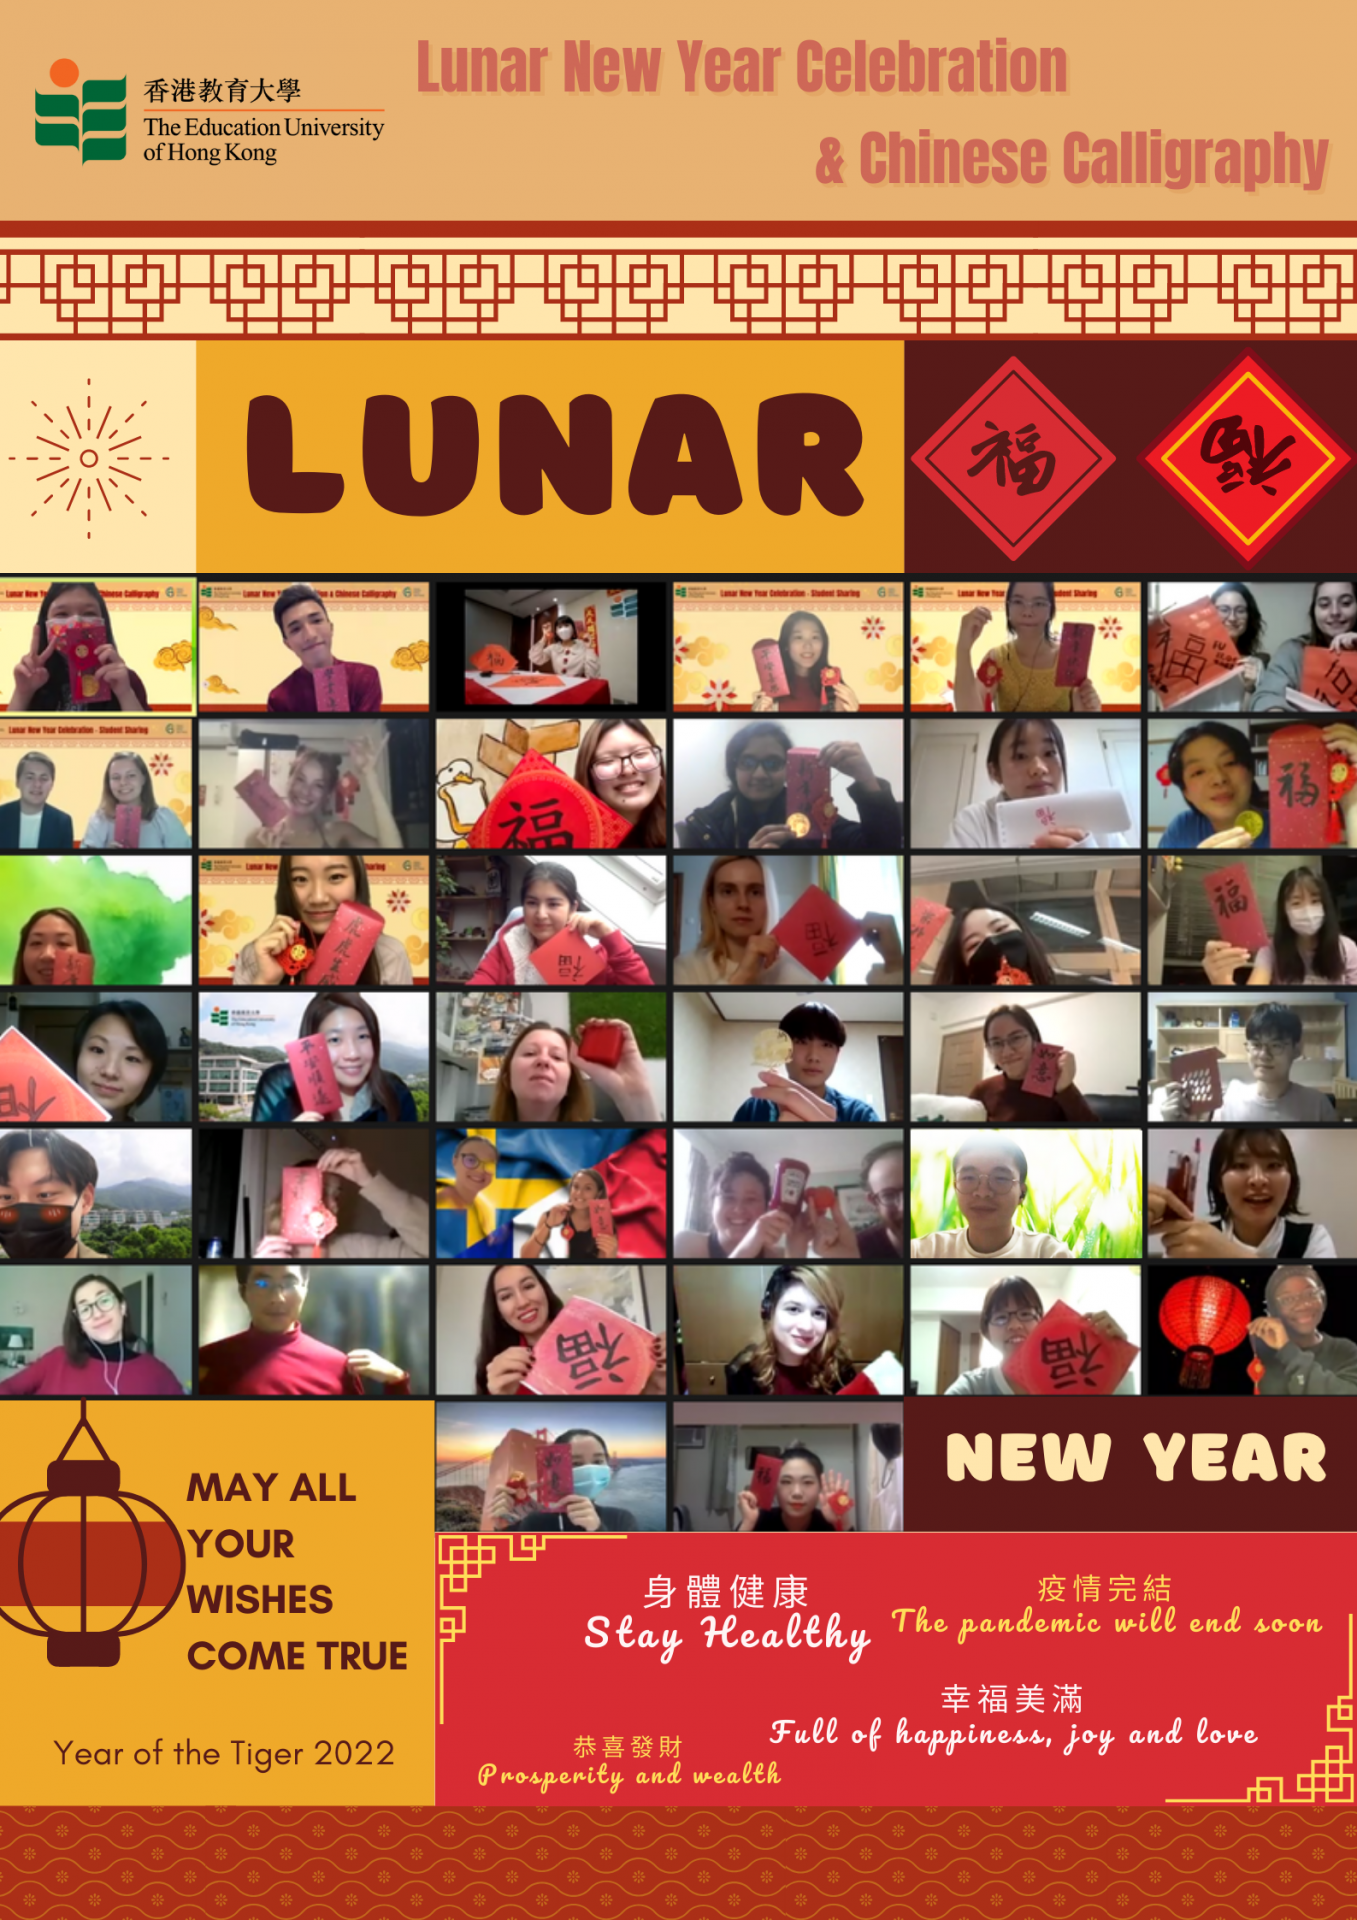 Lunar New Year Celebration & Chinese Calligraphy